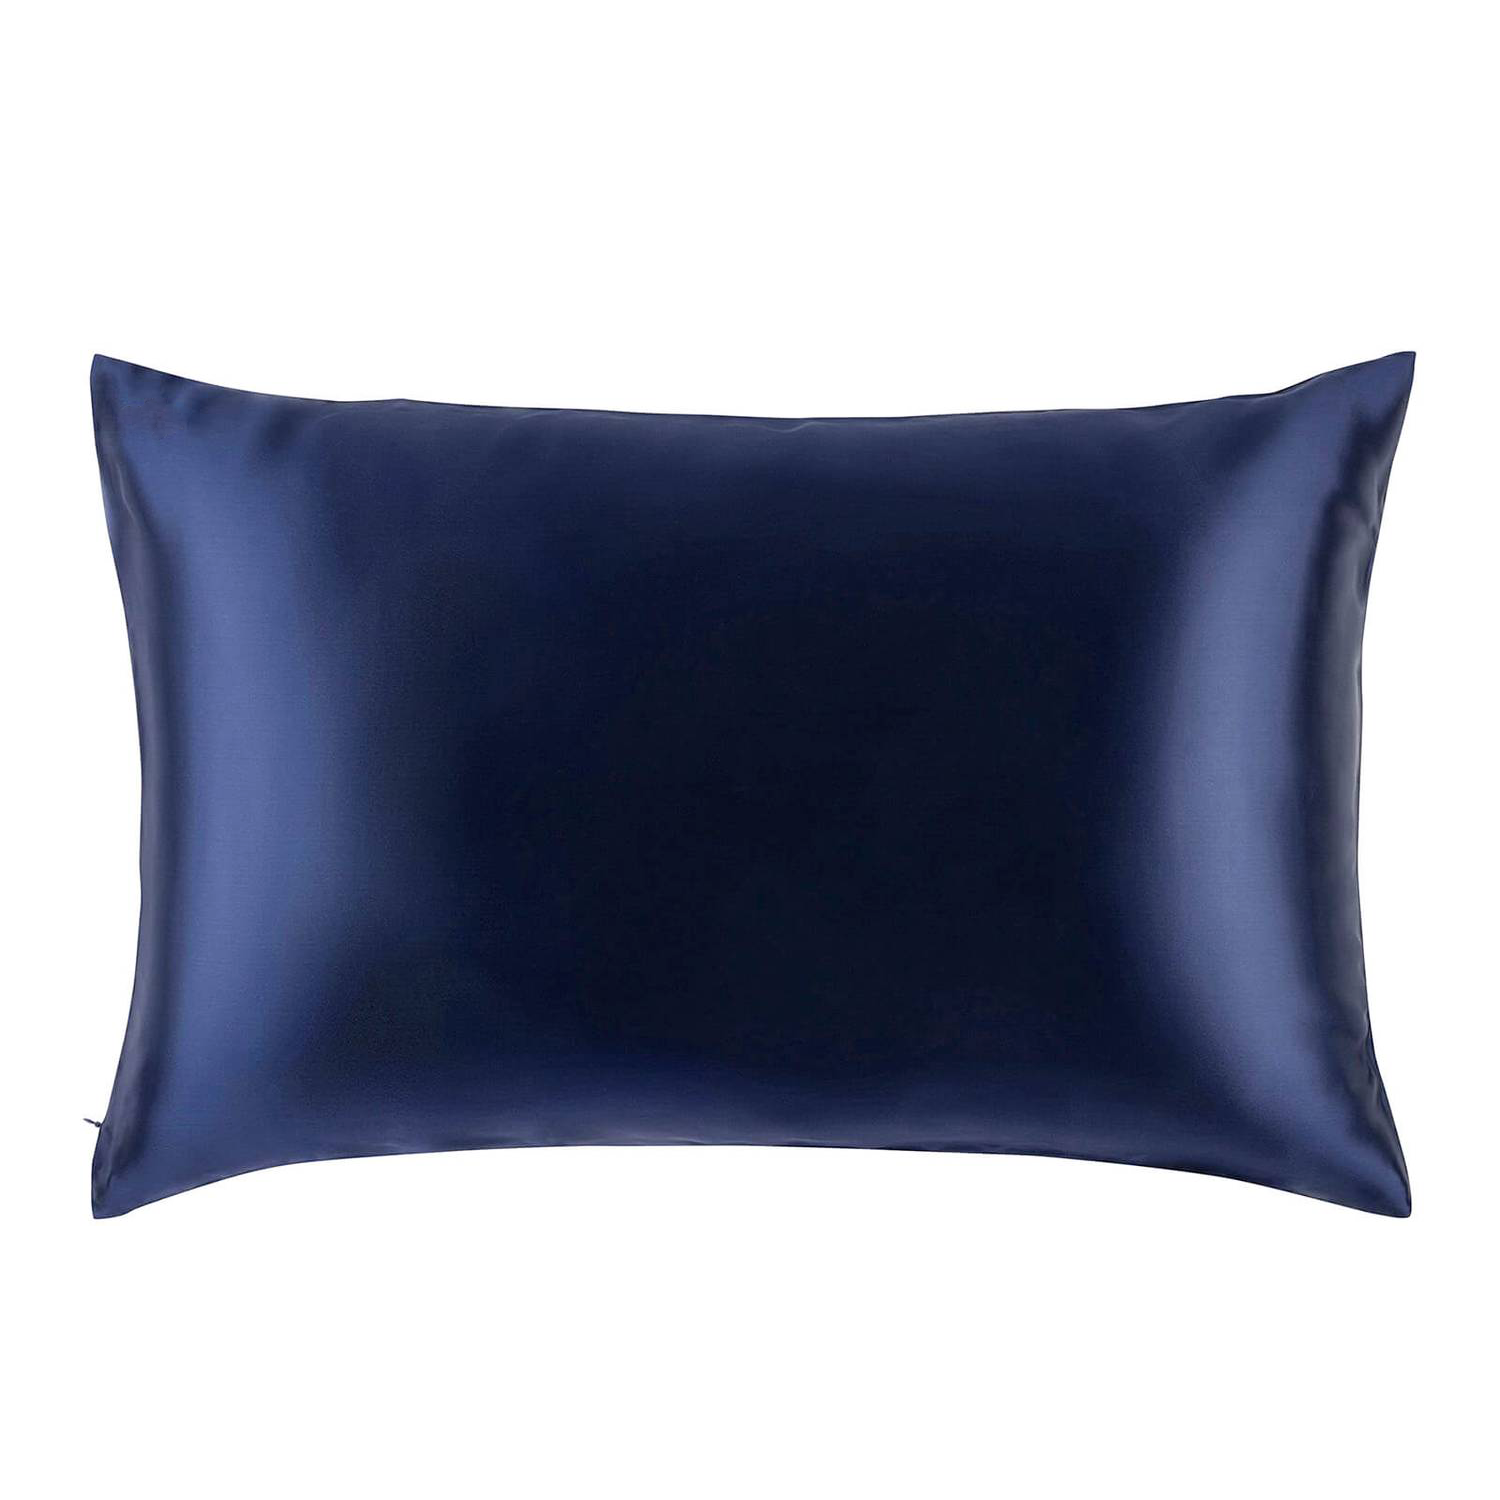 Natural Mulberry Silk Pillowcase with Cotton Underside (19 Momme) - MYK Silk #color_navy blue